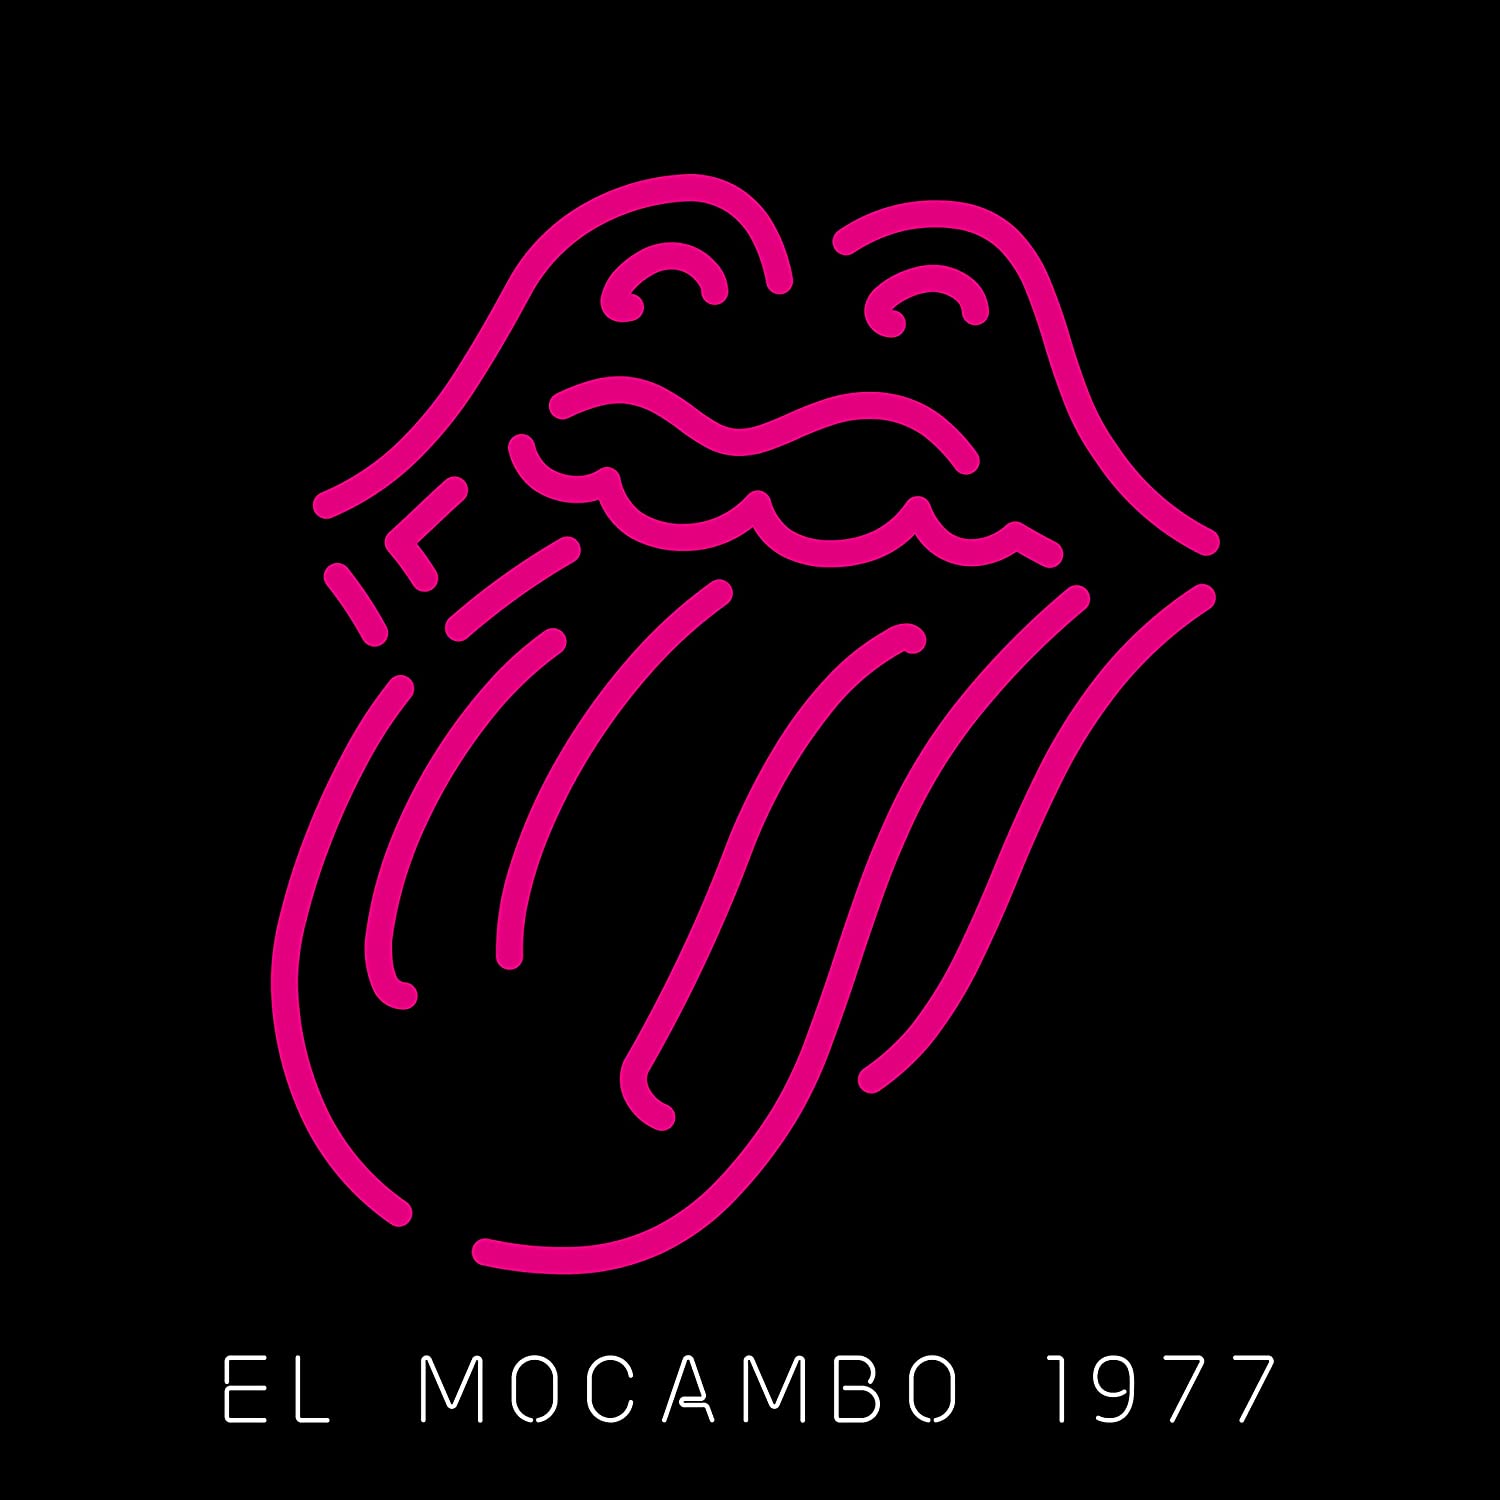 THE ROLLING STONES TO RELEASE 1977 ALBUM "LIVE FROM THE EL MOCAMBO"